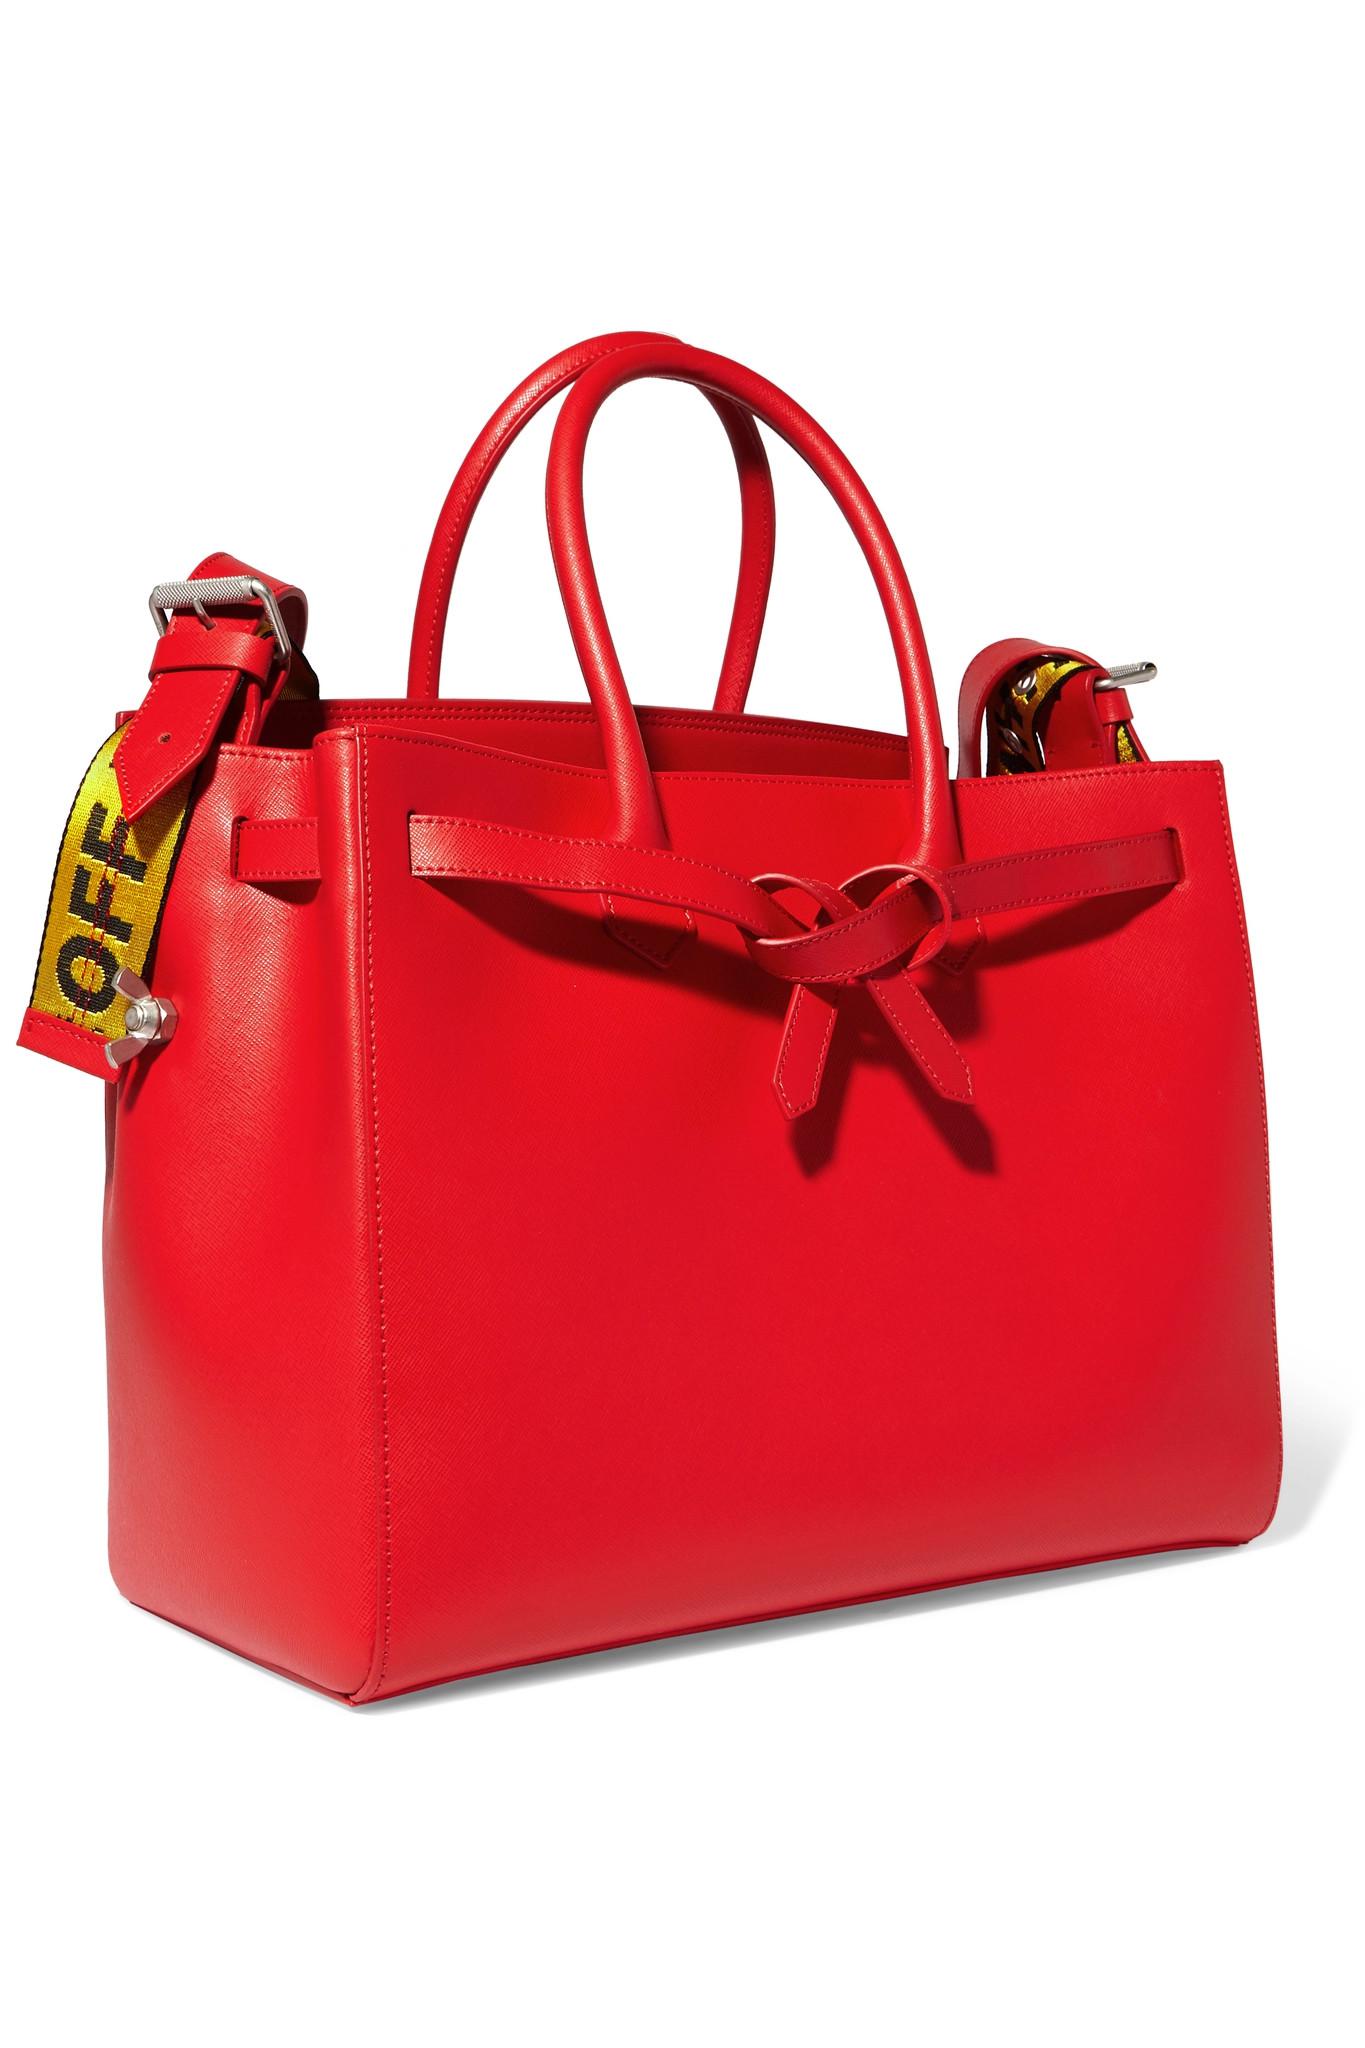 Off-White c/o Virgil Abloh Textured-leather Tote Bag in Red - Lyst